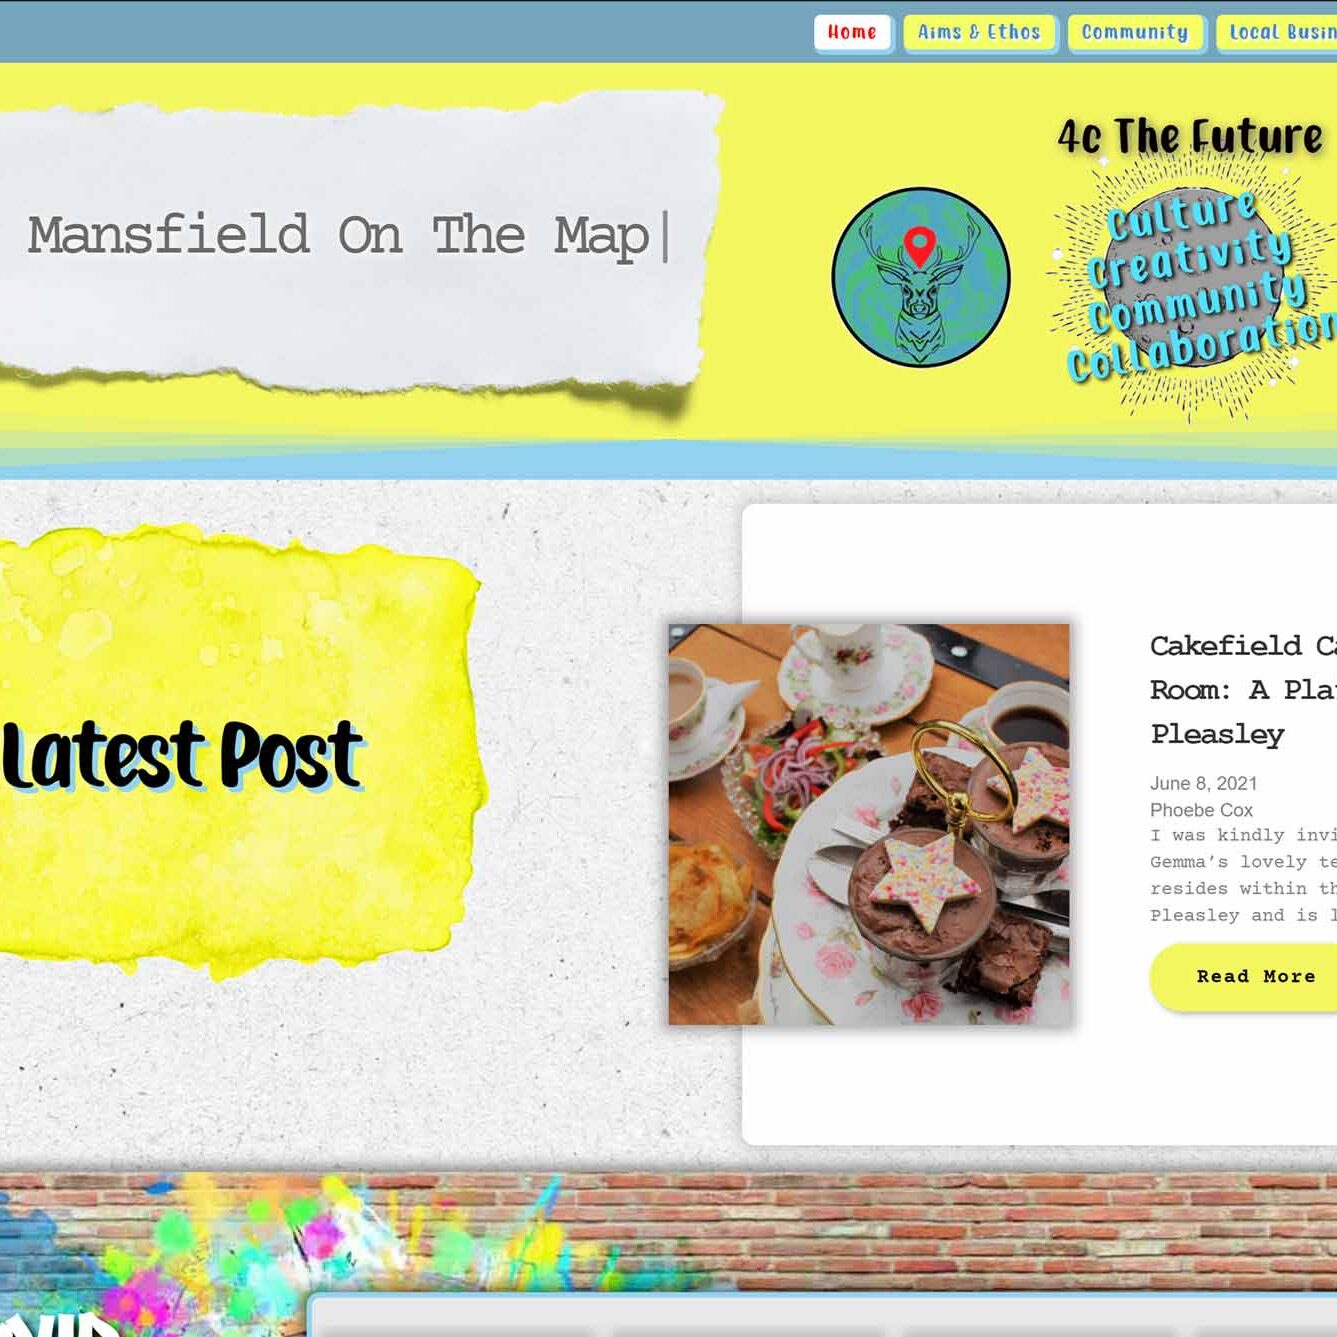 Mansfield on the map website